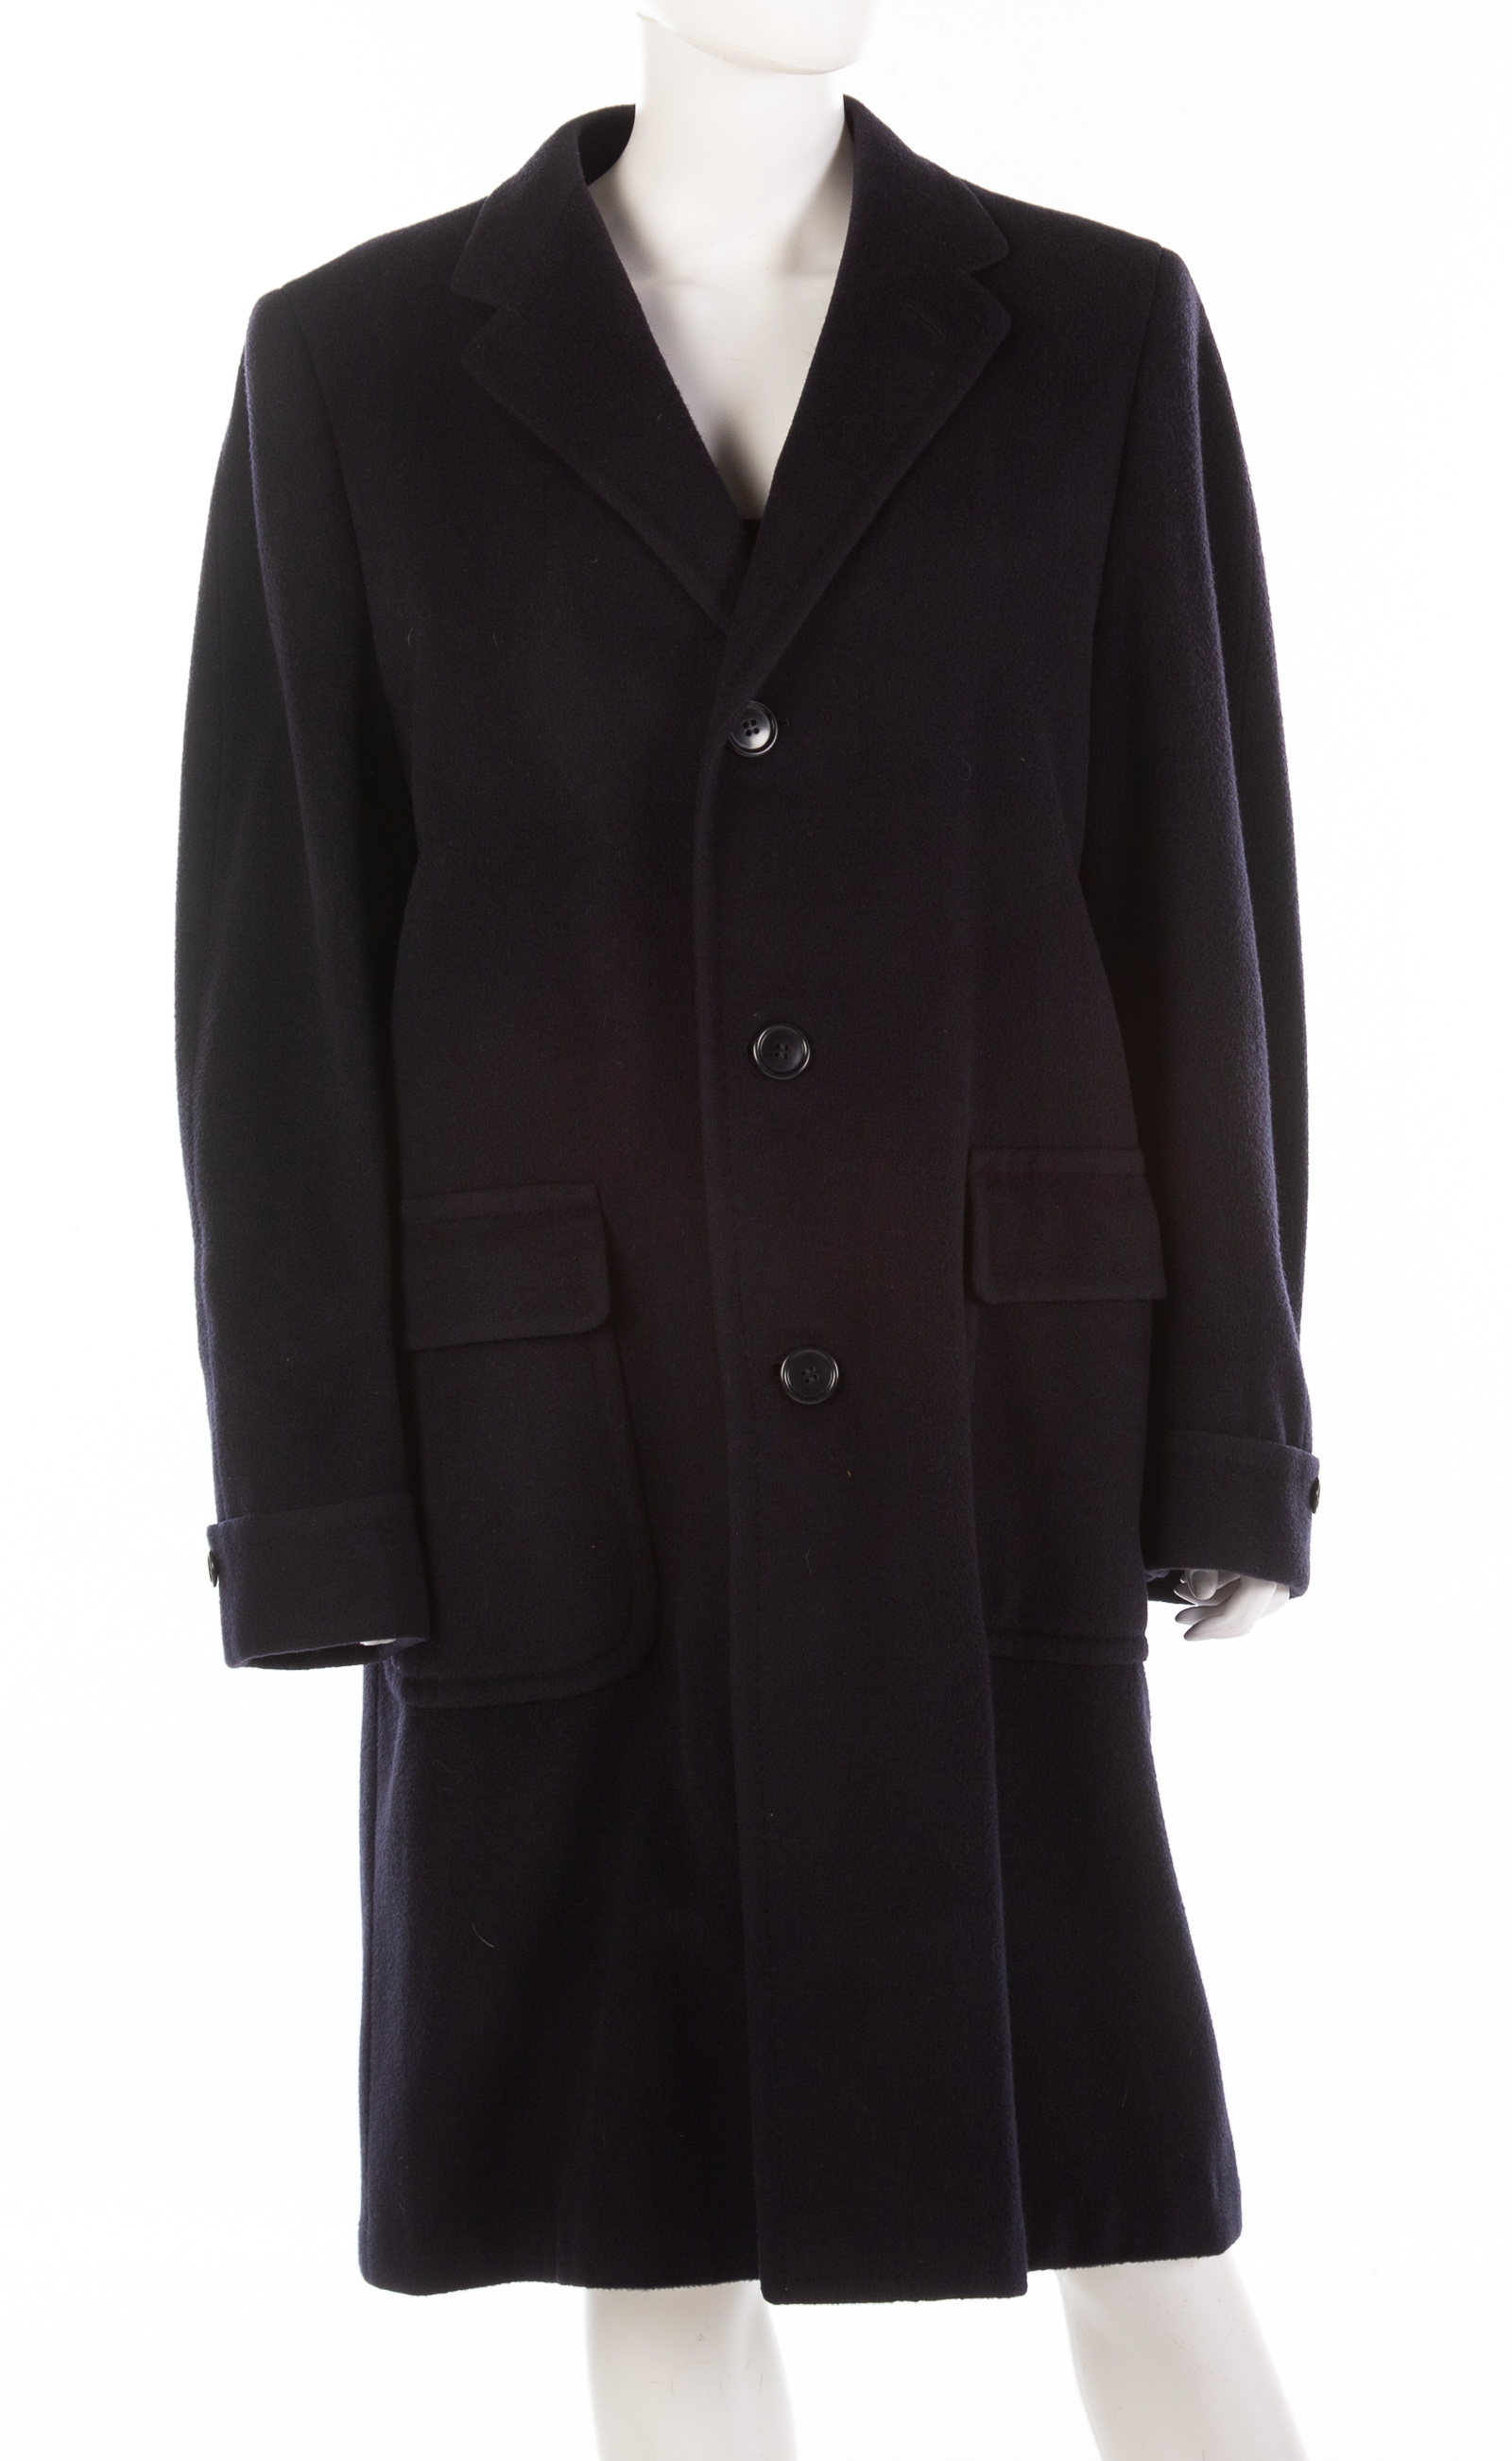 MENS NAVY CASHMERE COAT BY WYELOCH